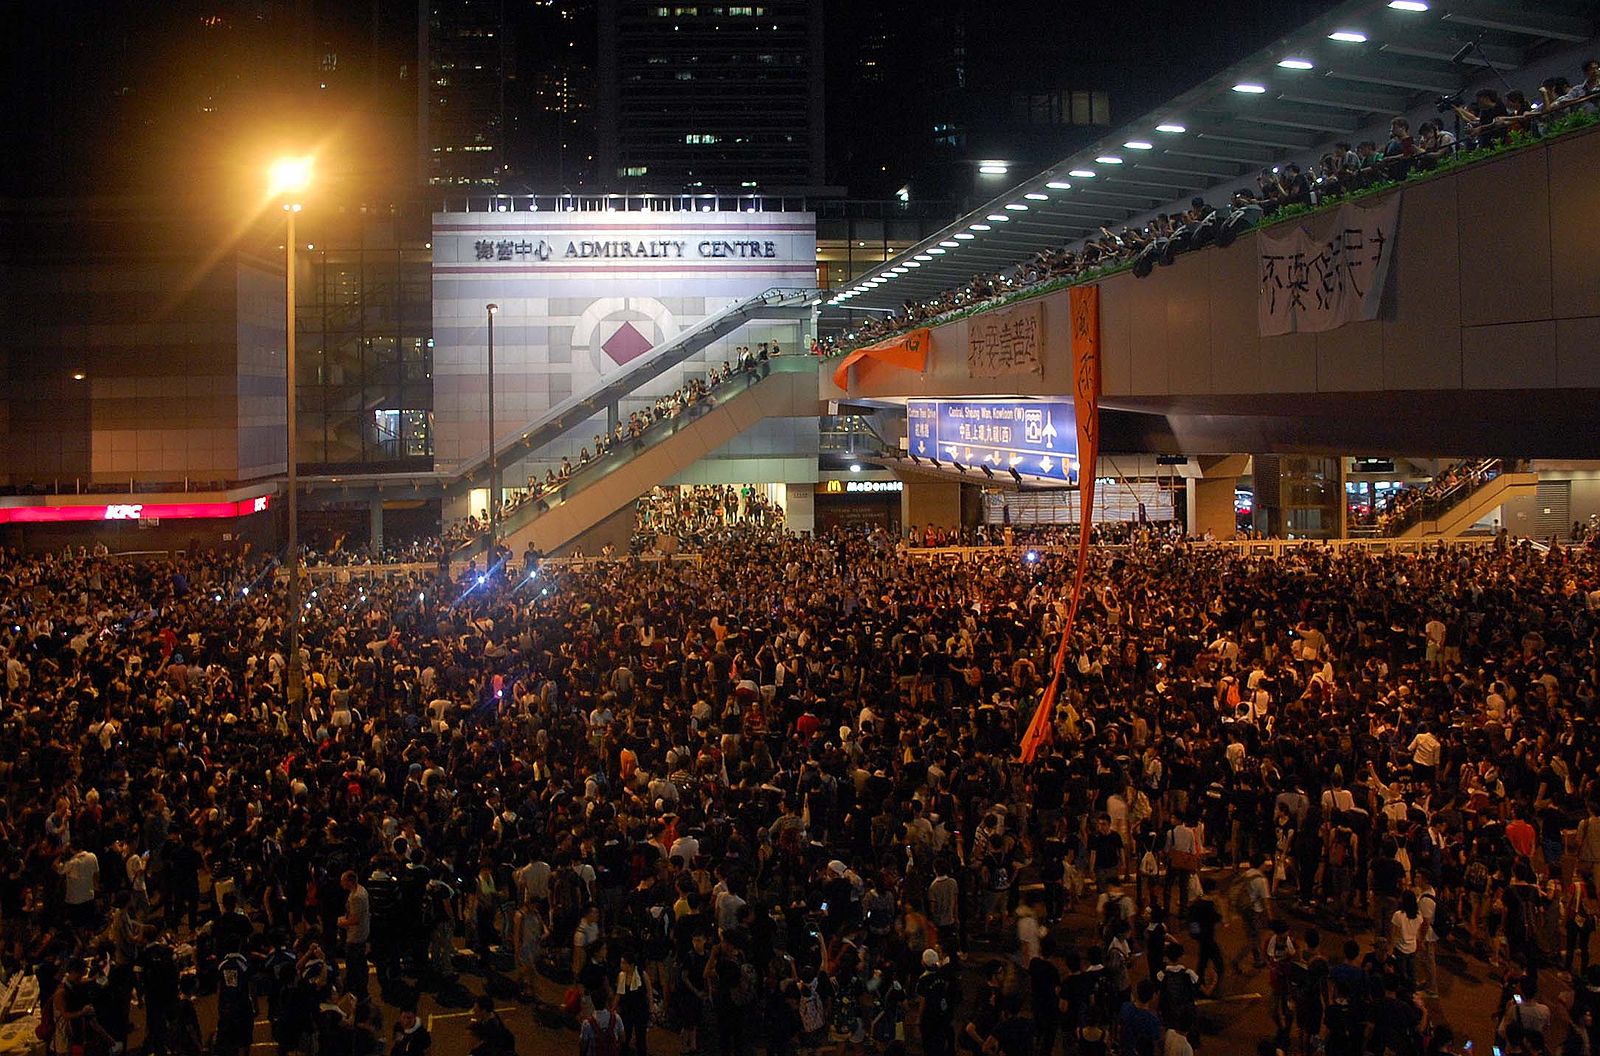 Protesters occupy the Admiralty Center in Hong Kong on Harcourt Road, on September 29, 2014.